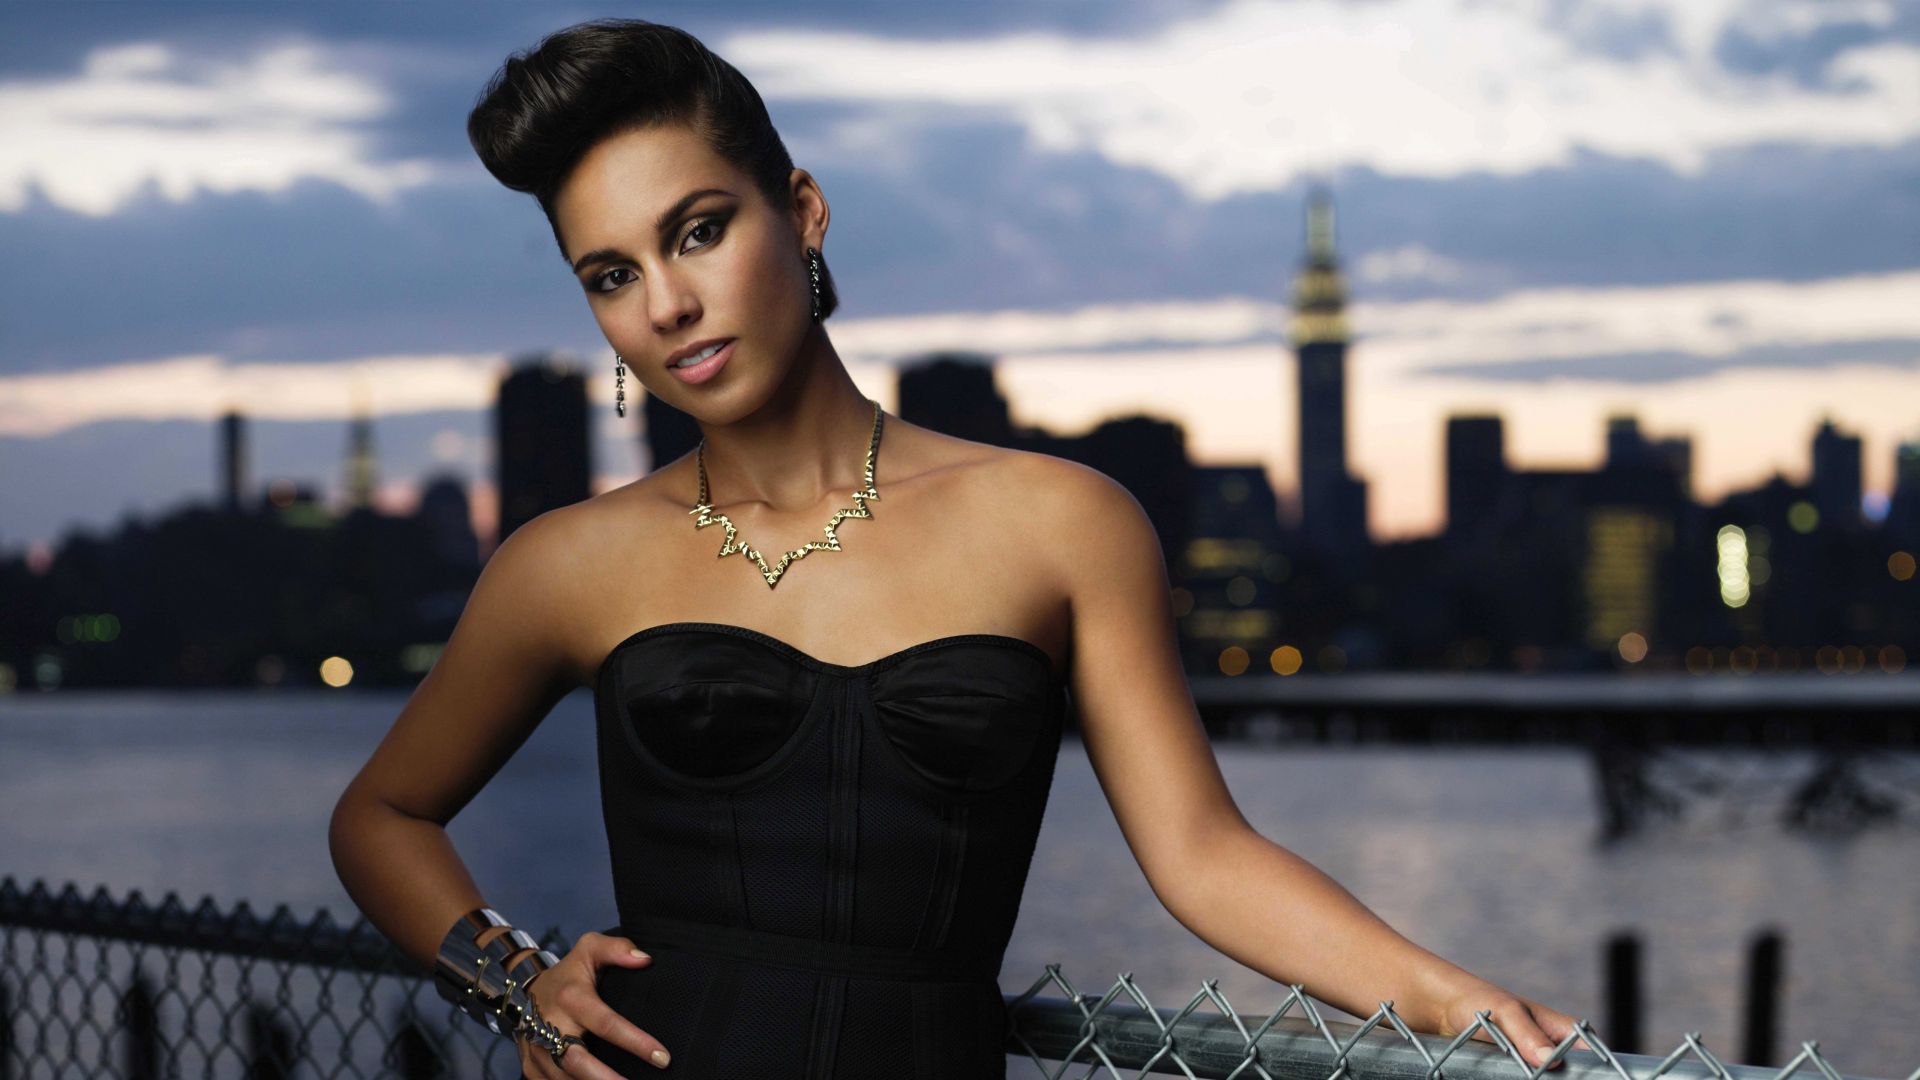 Alicia Keys, Most Popular Celebs, singer, songwriter, record producer, actress, car, taxi (horizontal)